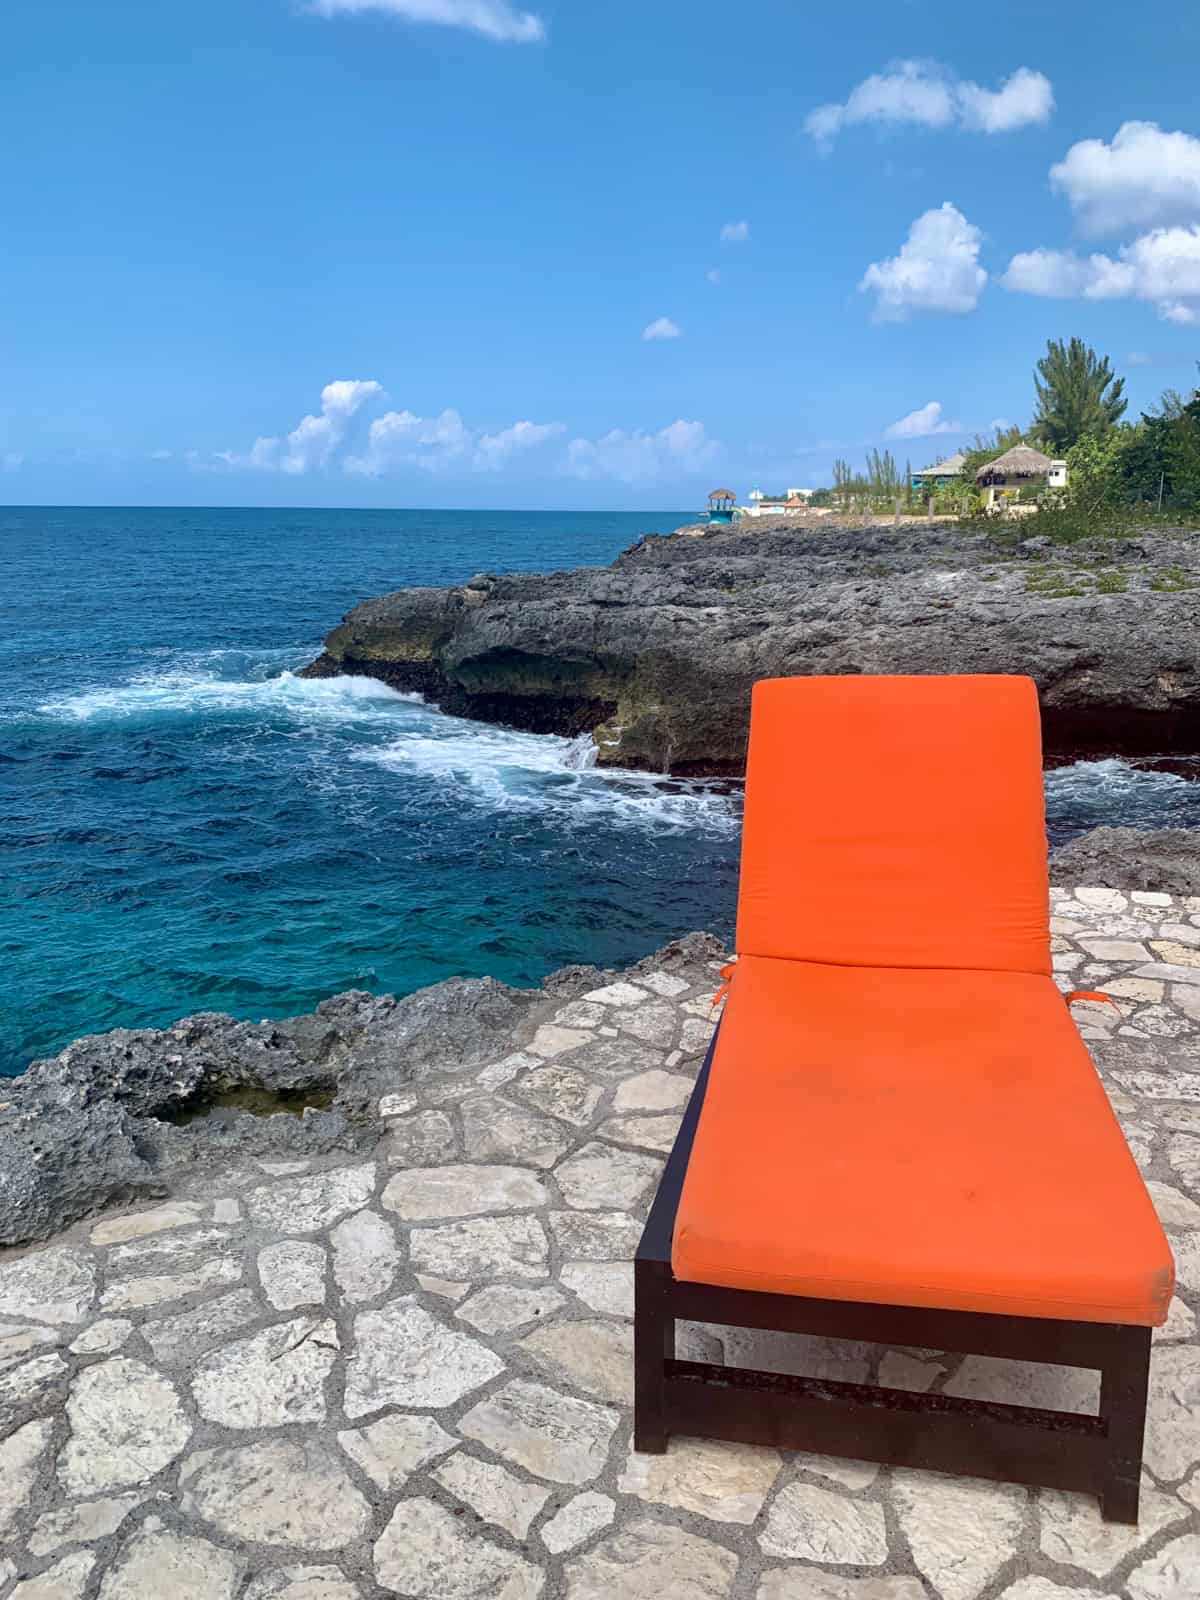 Hotel Review: Tensing Pen in Negril, Jamaica | What to expect staying at this boutique resort in Negril's West End. Perched on gorgeous cliffs, this hotel consistently makes Travel+Leisure's top hotels in the world list. I review the grounds, rooms, food, experience, and more. #caribbean #hotelreview #besthotels #jamaica